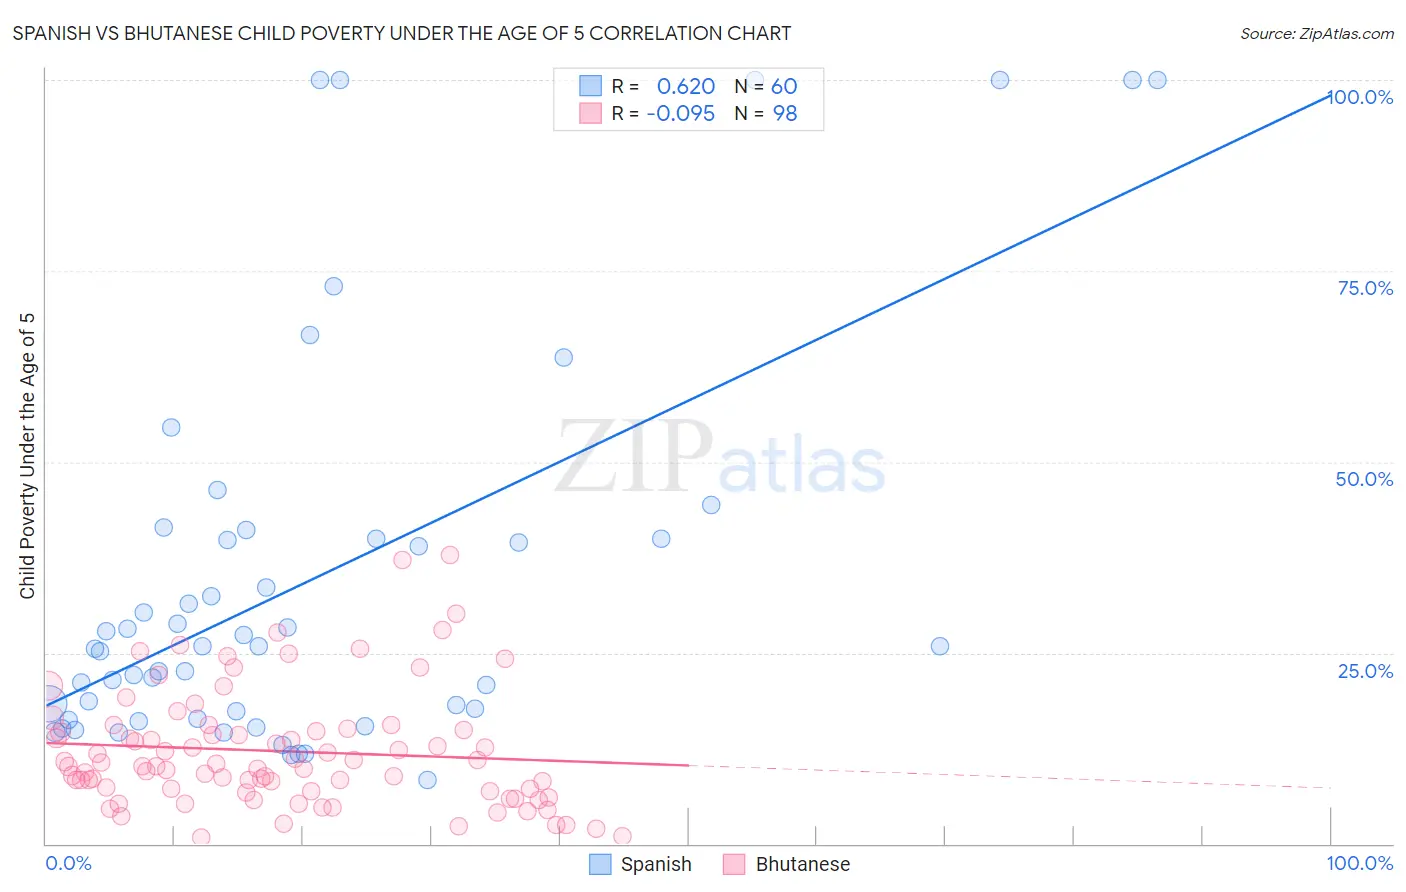 Spanish vs Bhutanese Child Poverty Under the Age of 5